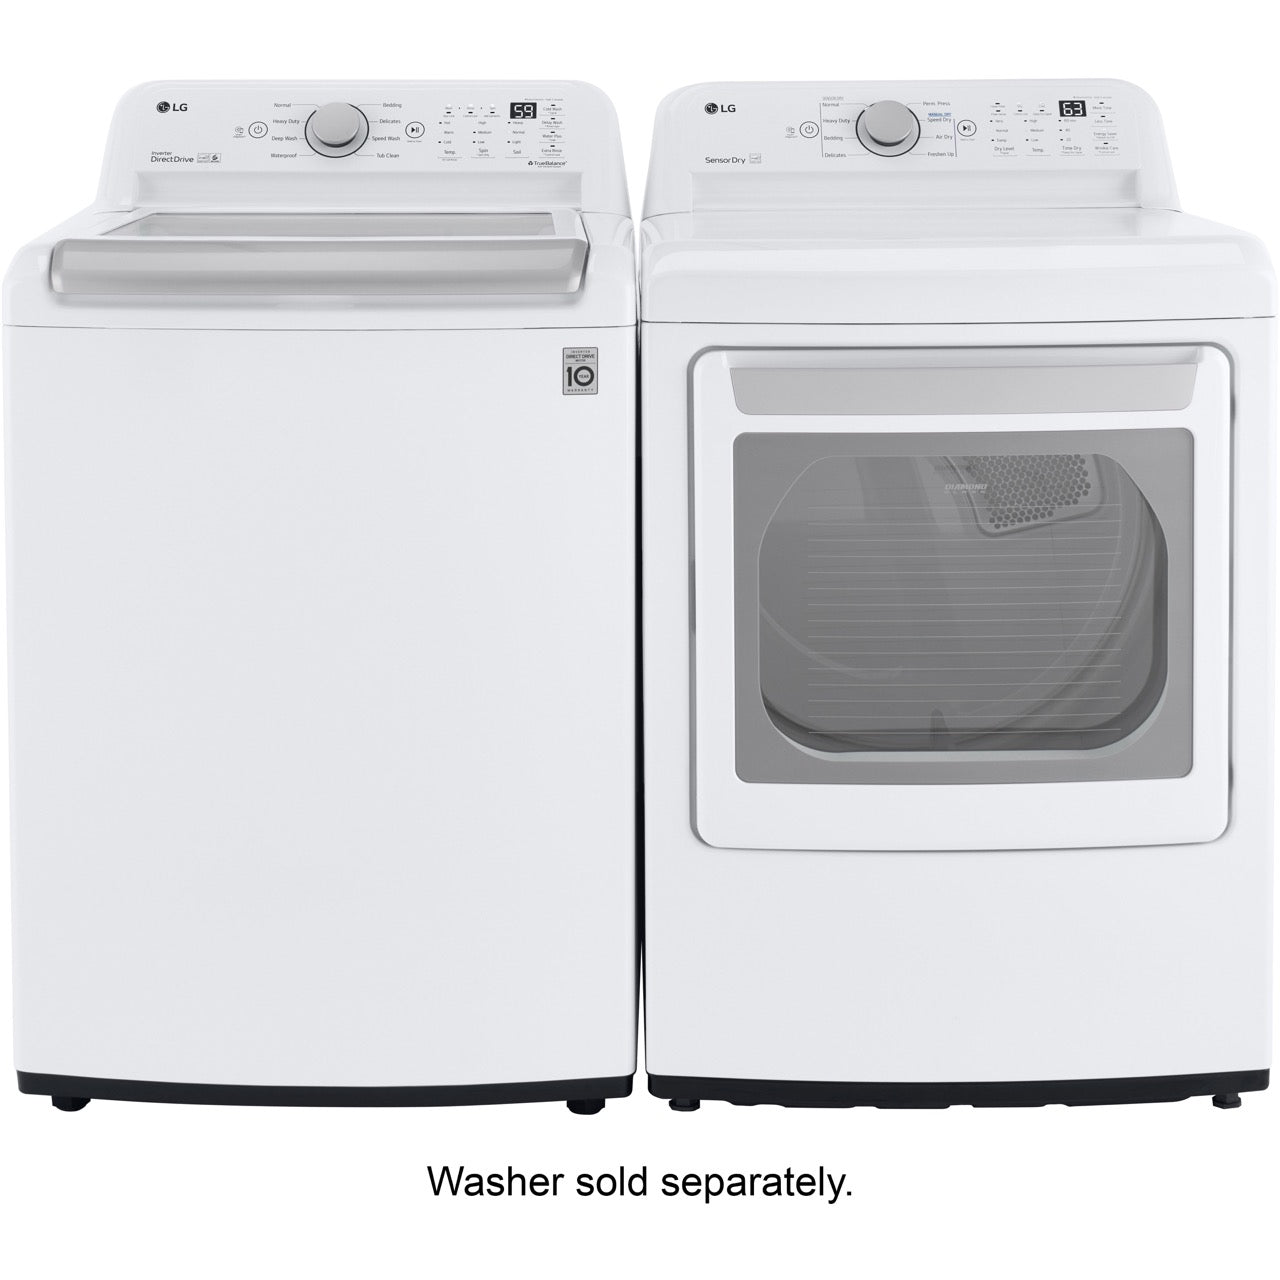 LG 7.3-cu. ft. Ultra Large Capacity Electric Dryer with Sensor Dry Technology in White (DLE7150W)